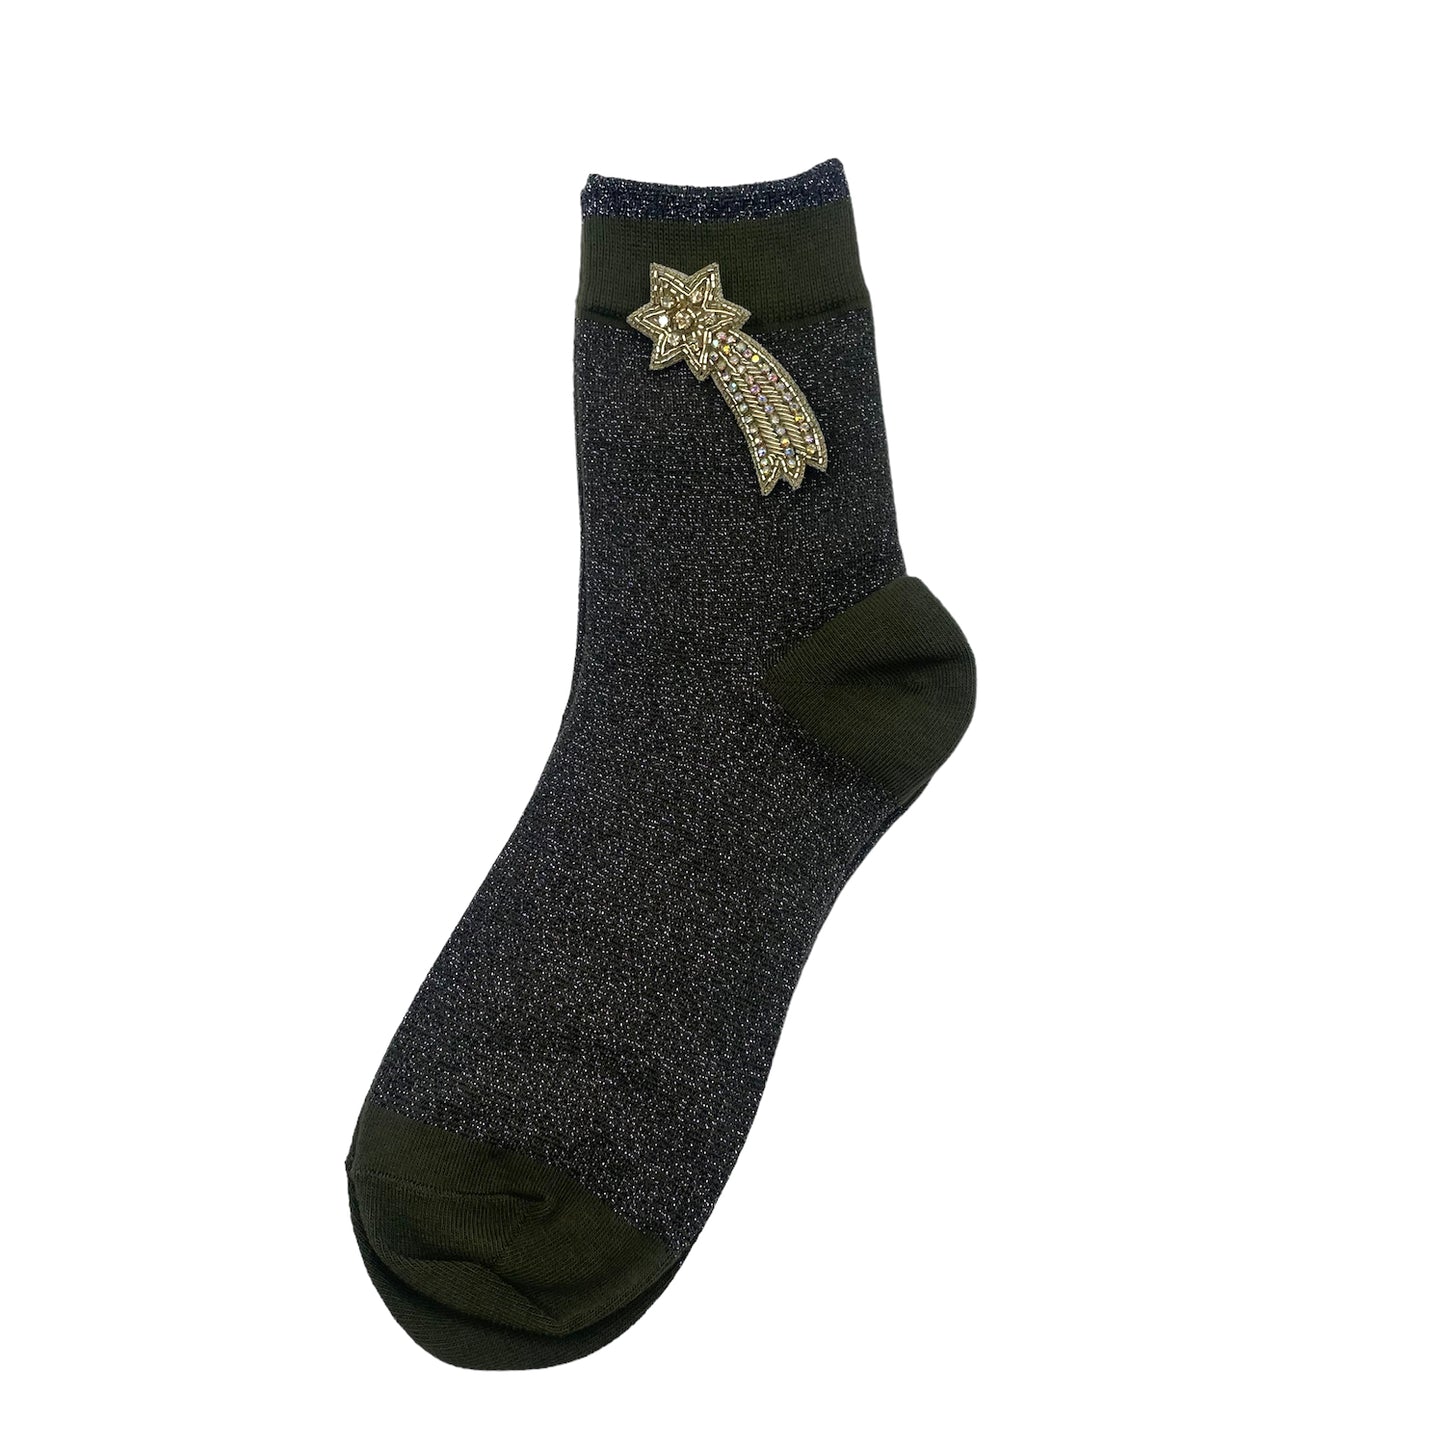 Tokyo socks in ivy with a shooting star brooch